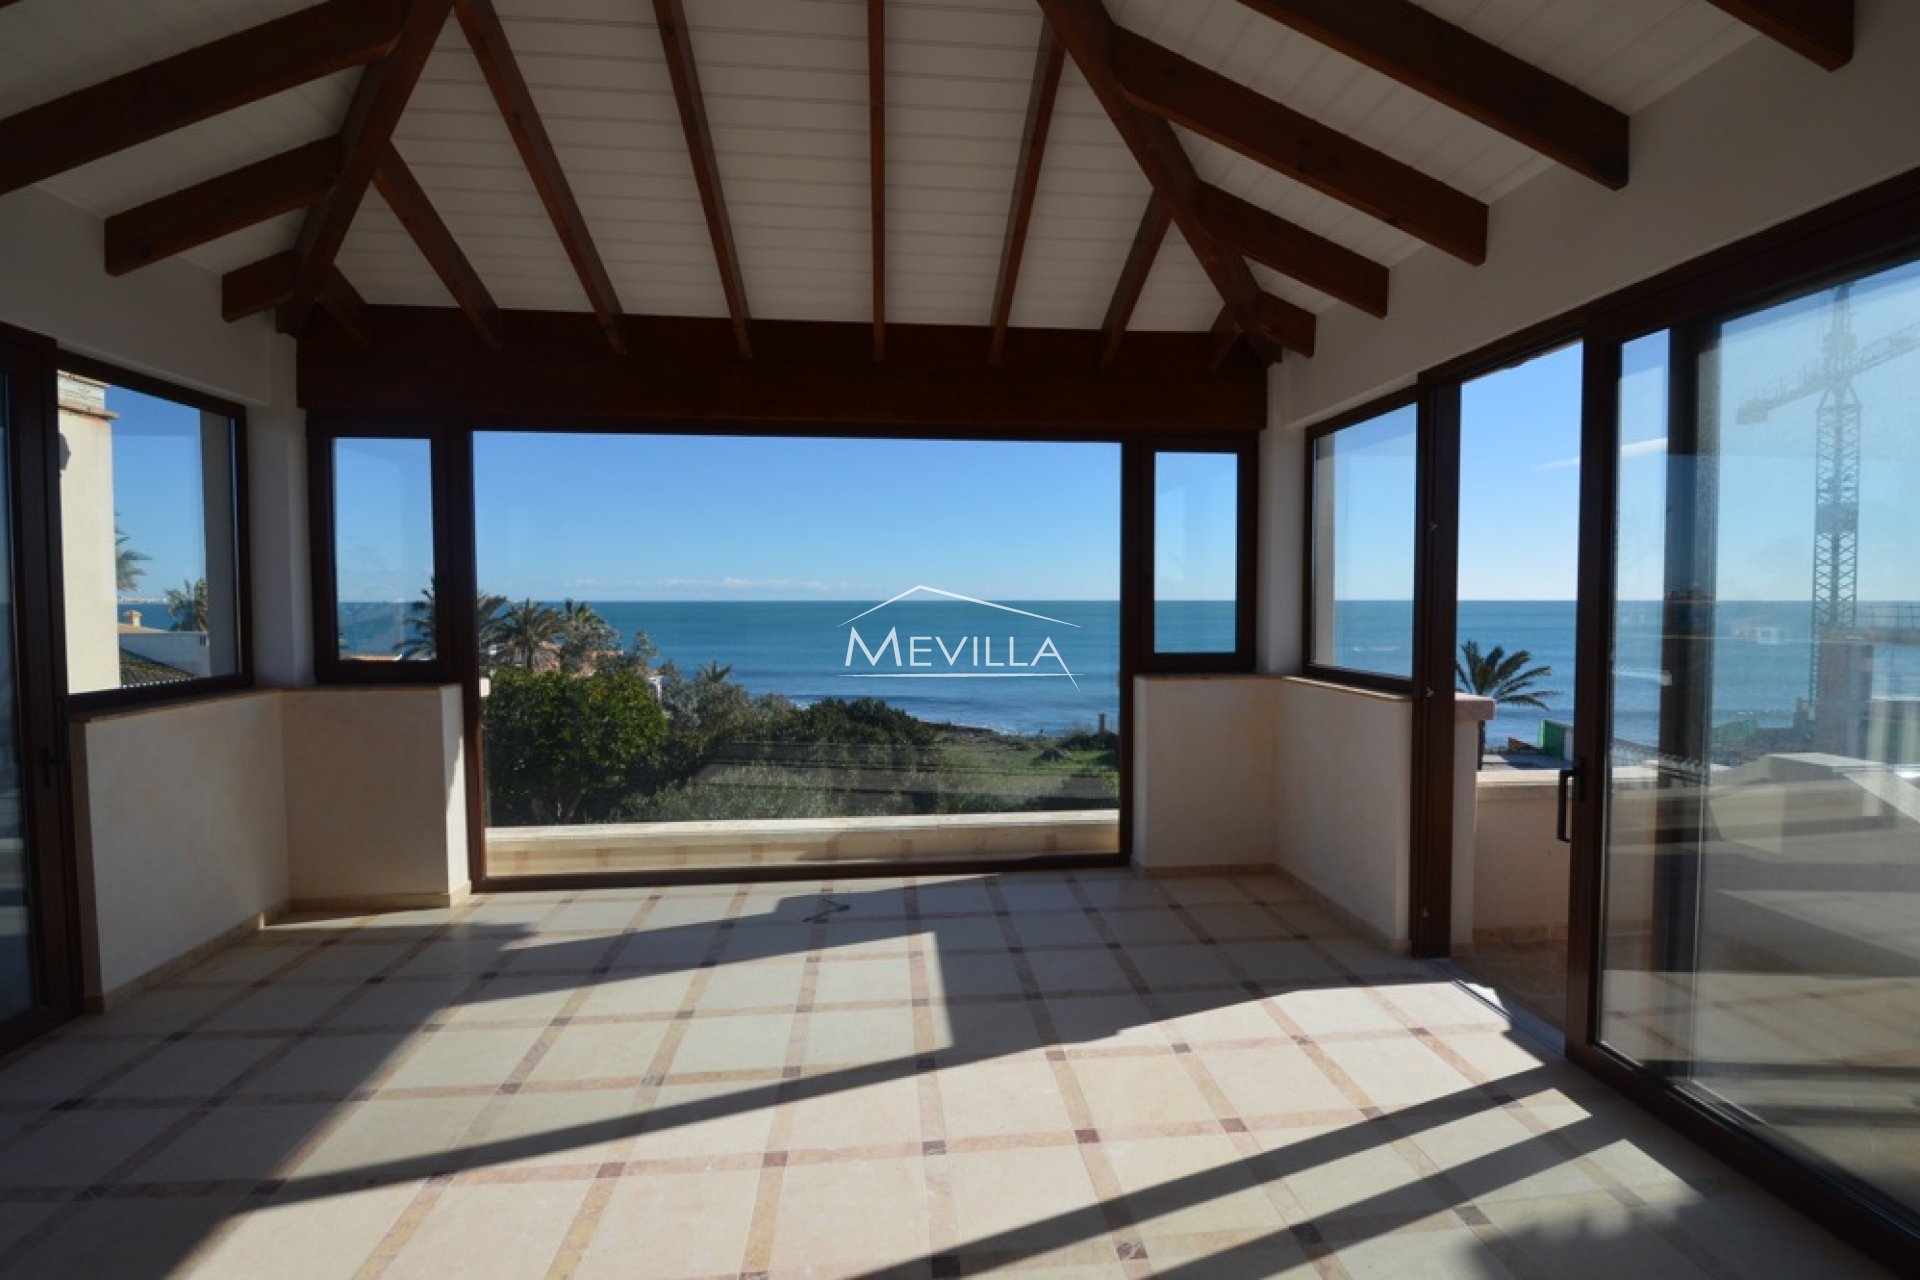 The room with views to the sea